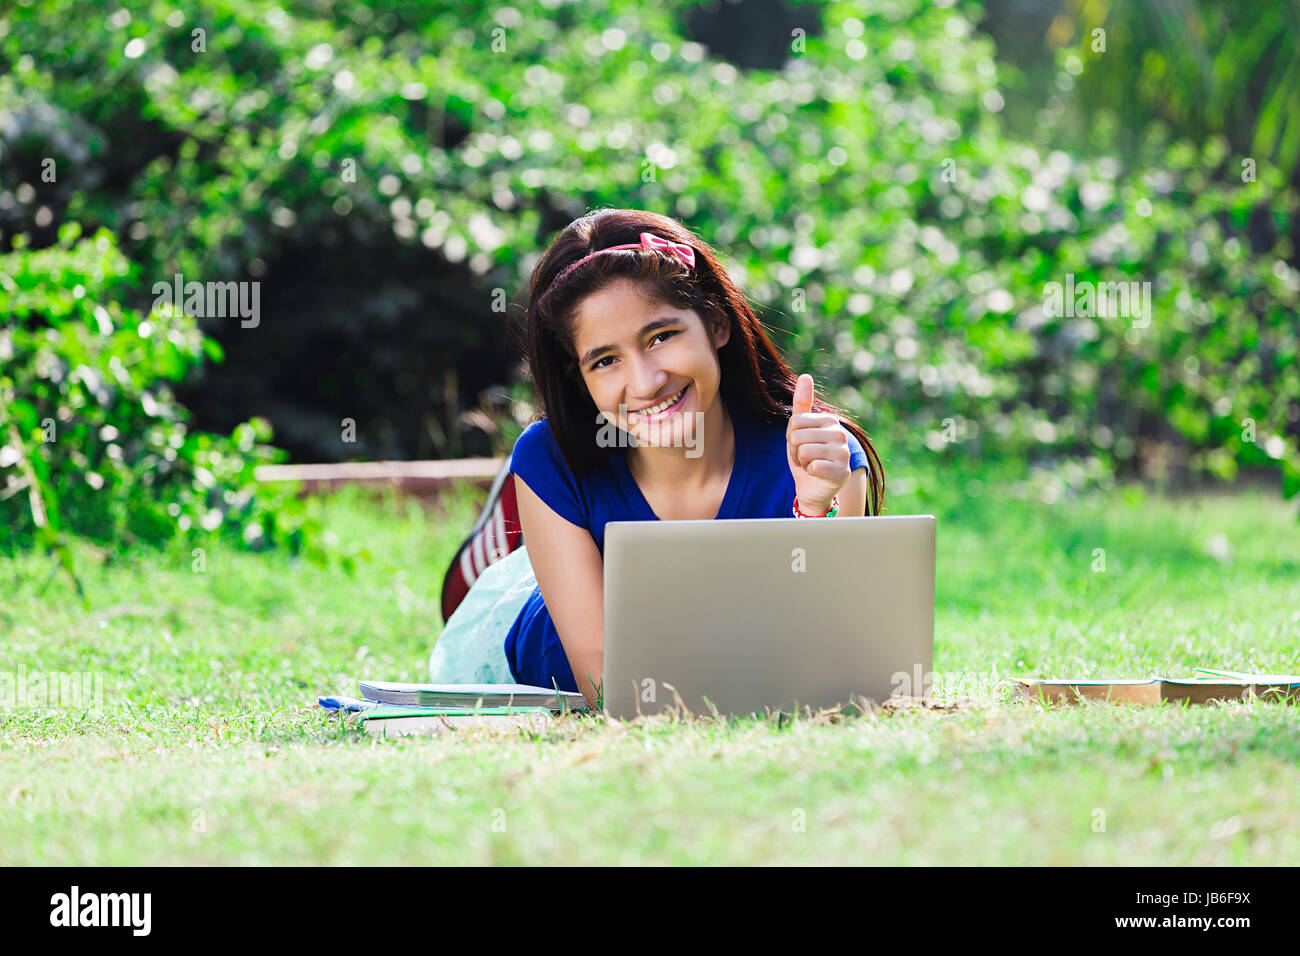 1 Indian college girl student using laptop and showing Thumbs up étudier au park Banque D'Images